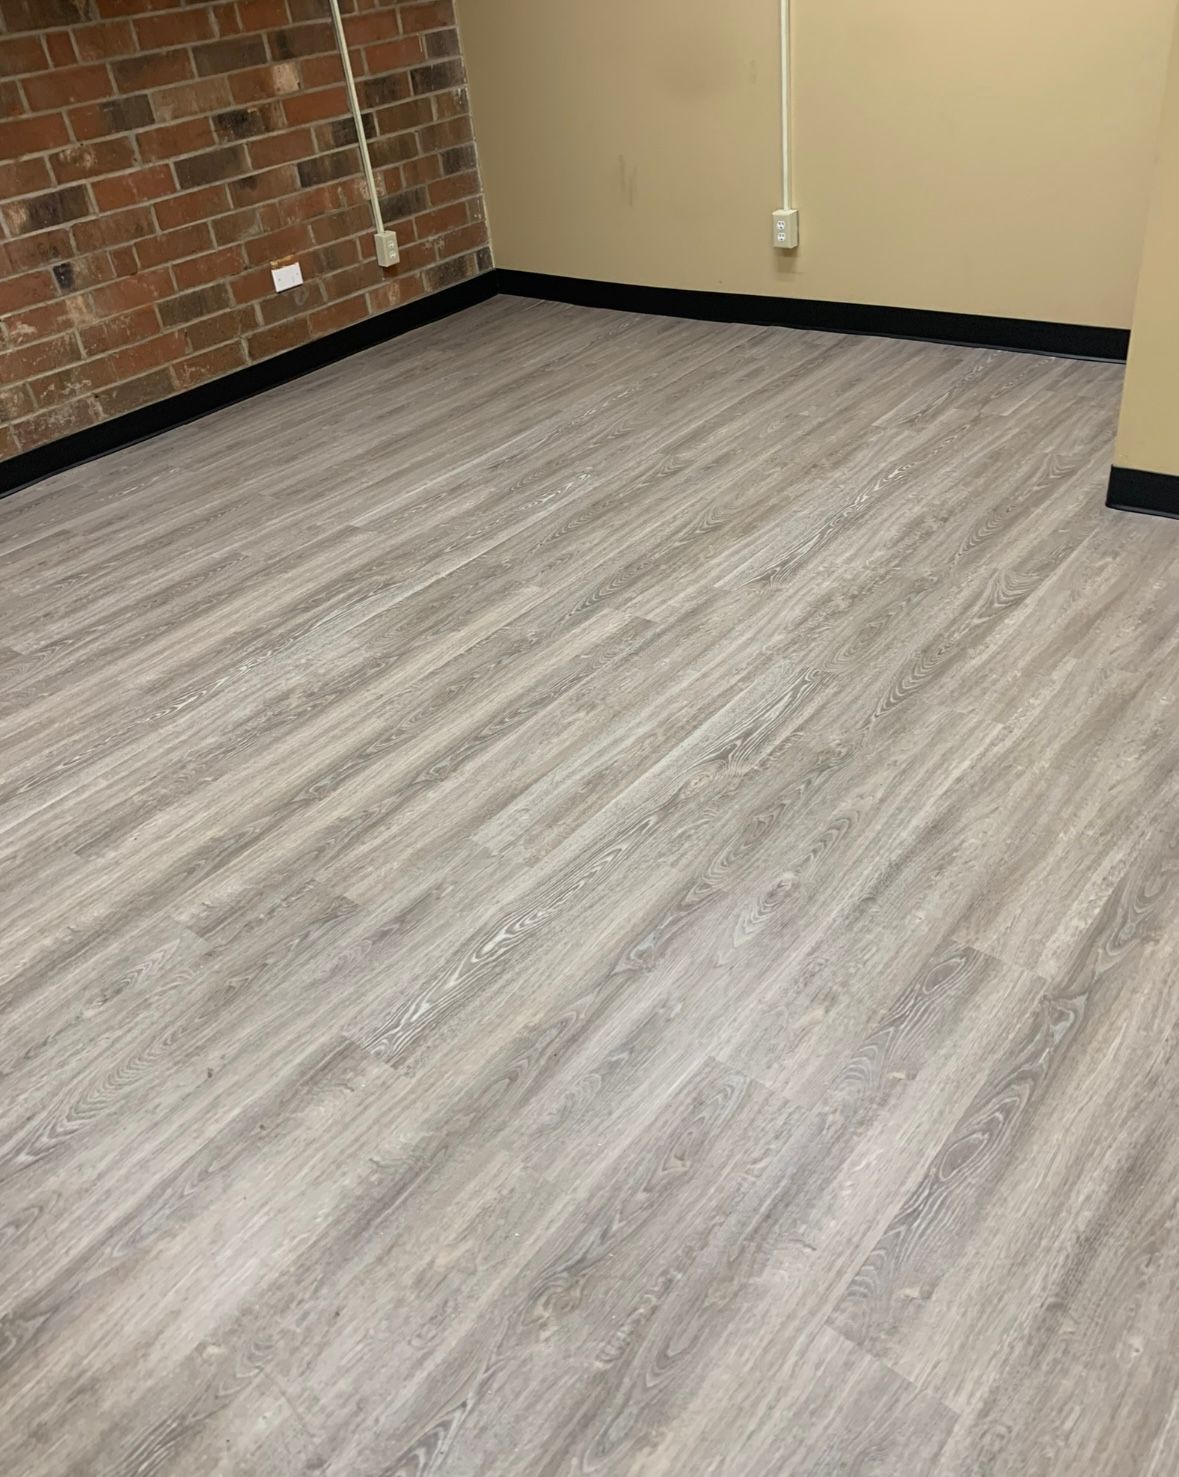 A new floor that was purchased from a flooring store serving Elroy, NC